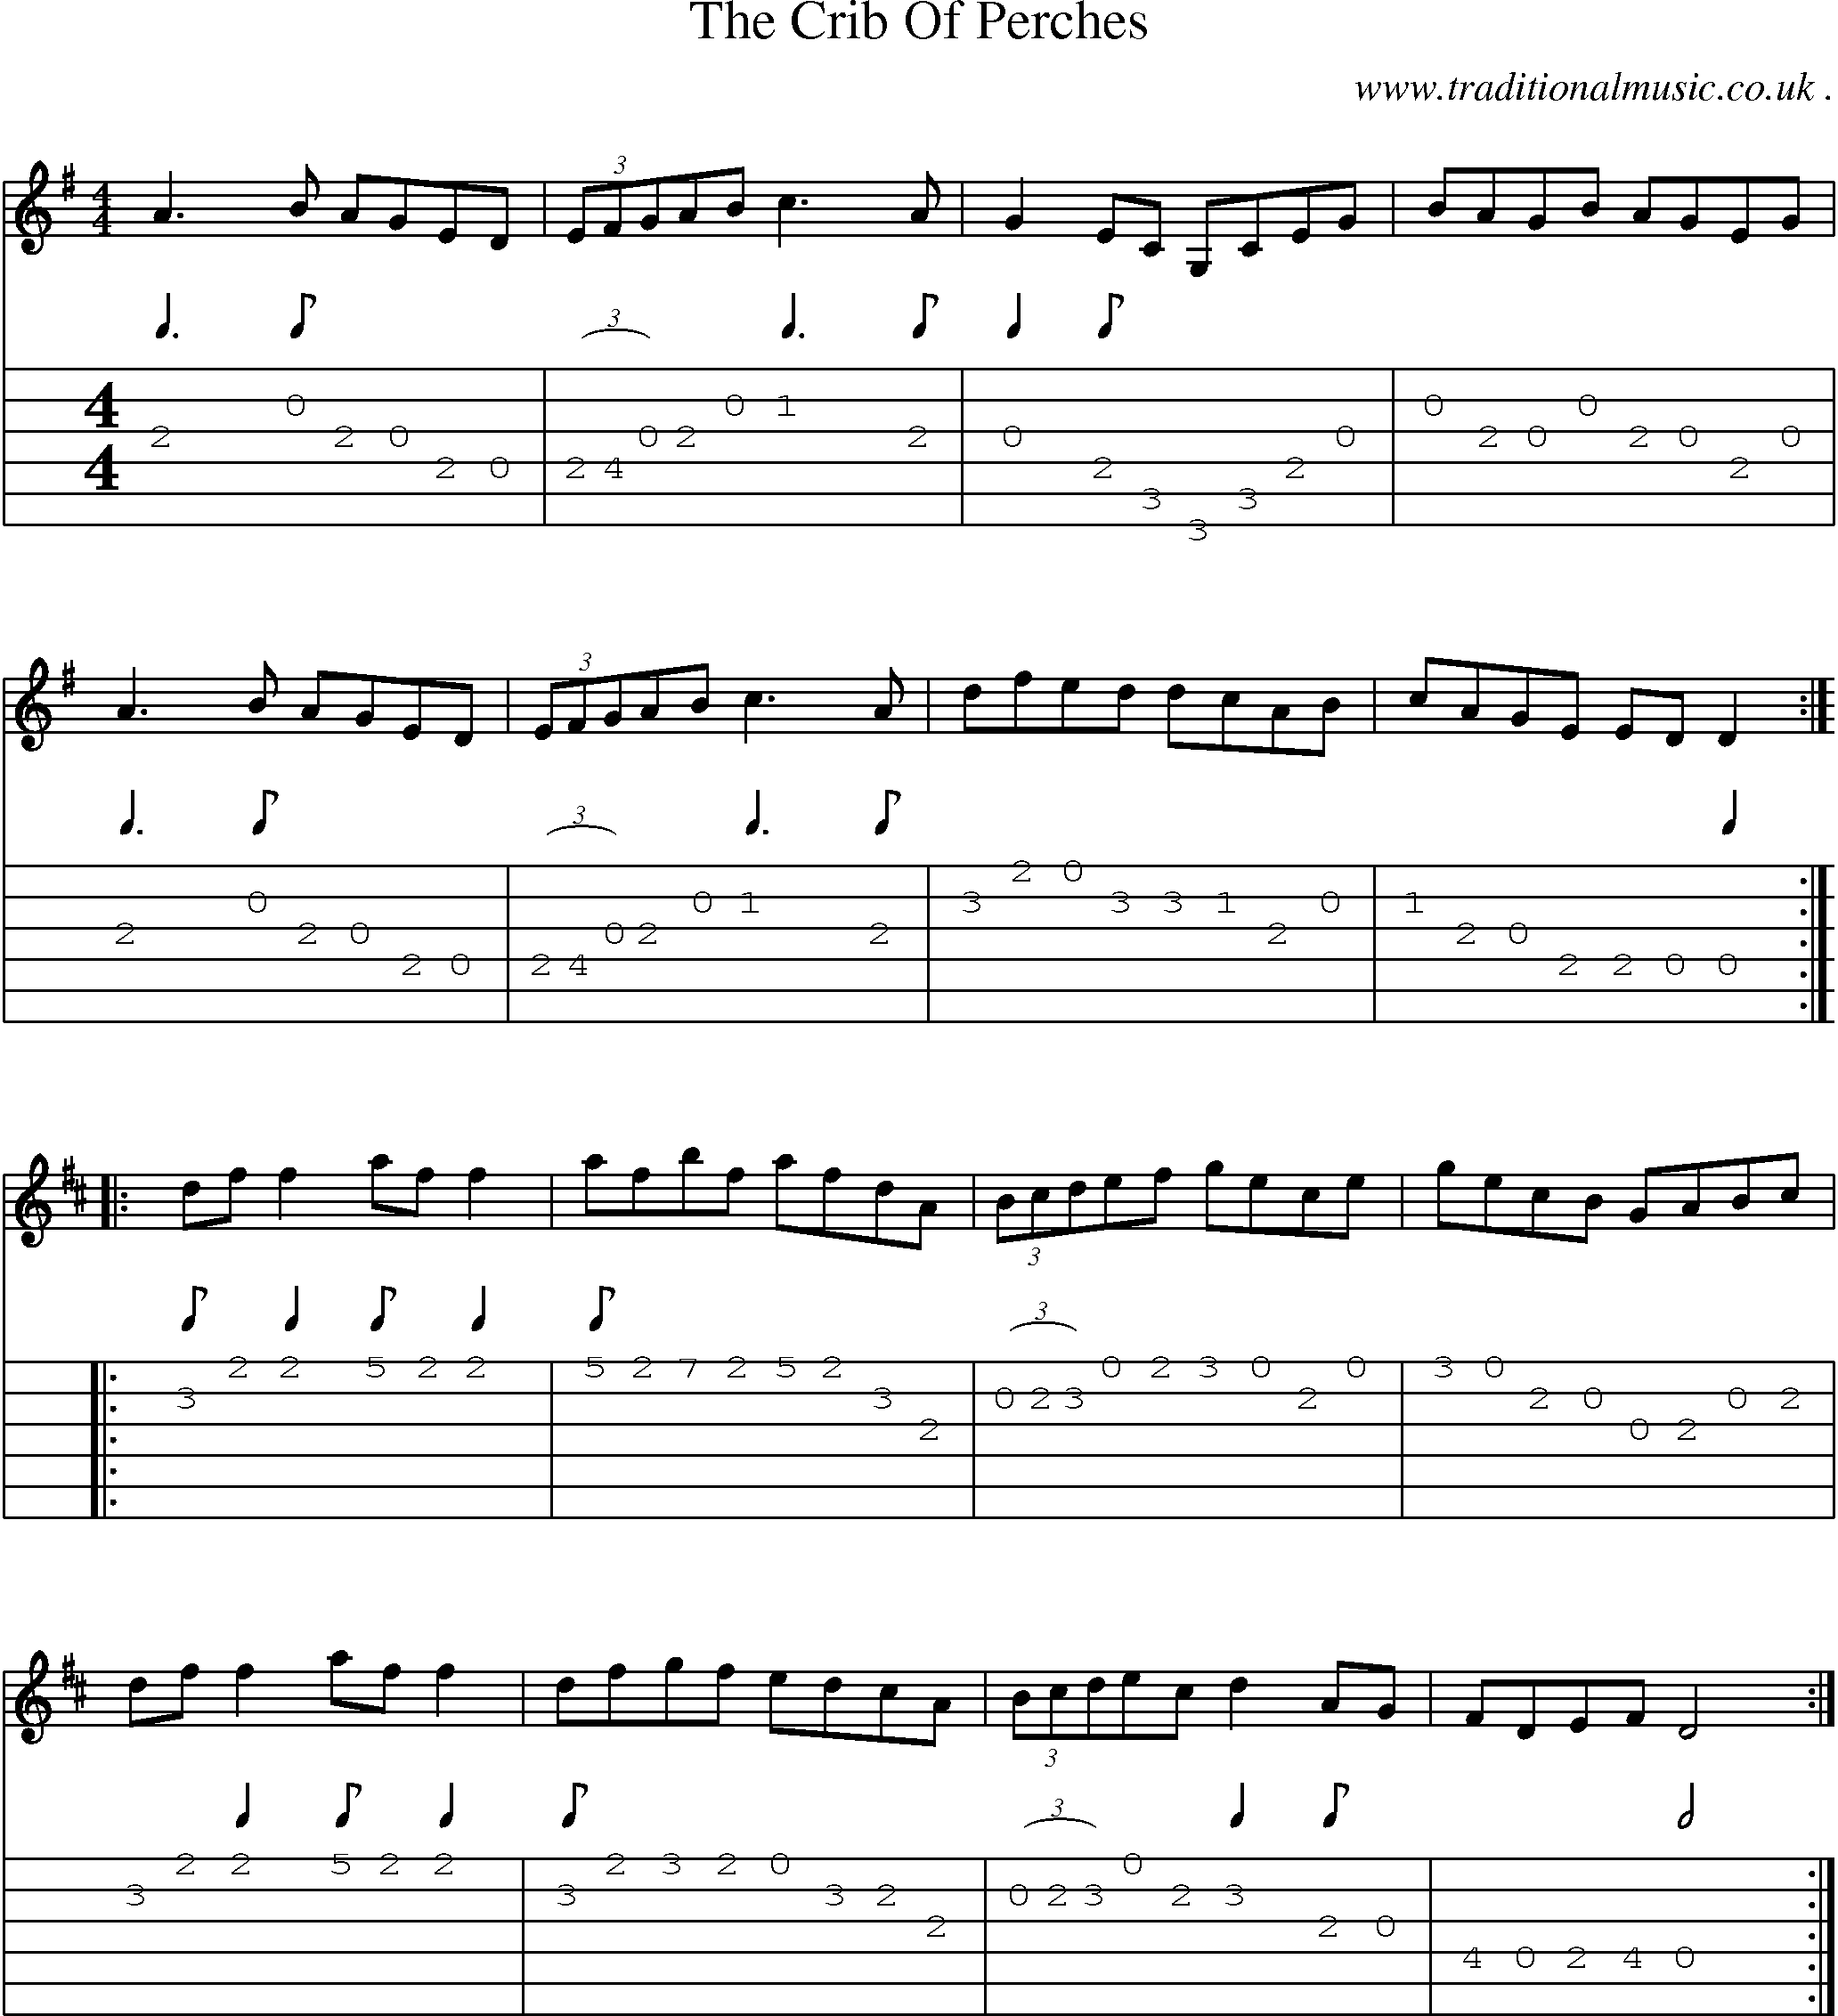 Sheet-Music and Guitar Tabs for The Crib Of Perches